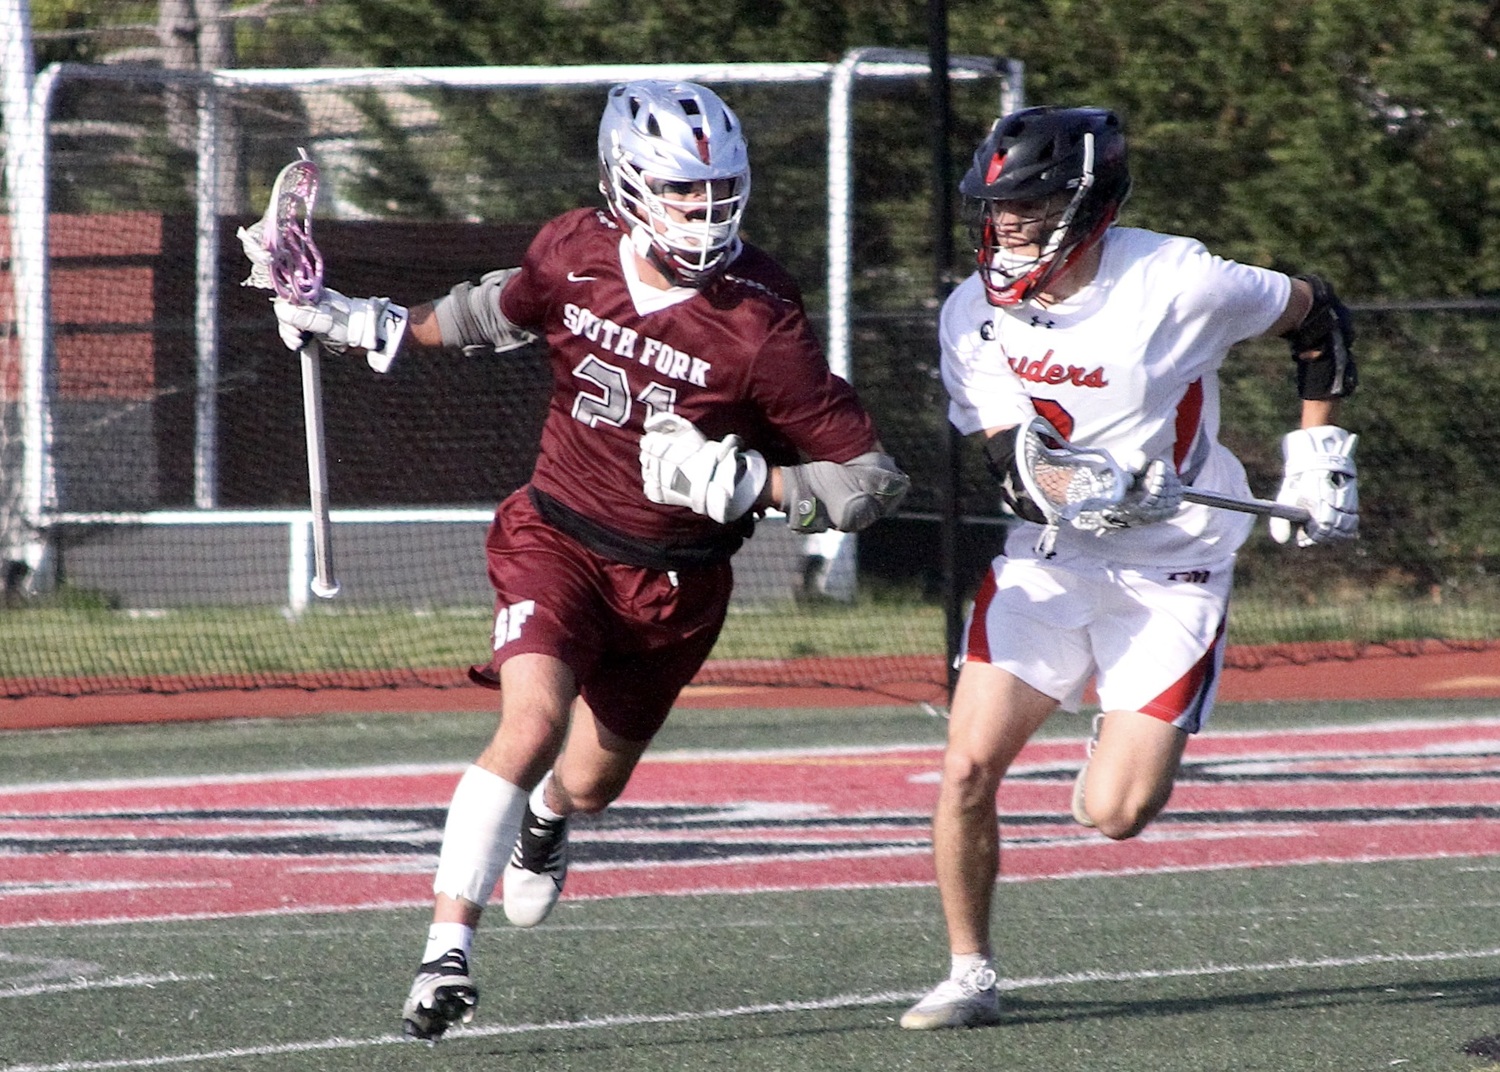 Junior midfielder Jack Cooper moves the ball around the back of the cage. DESIRÉE KEEGAN